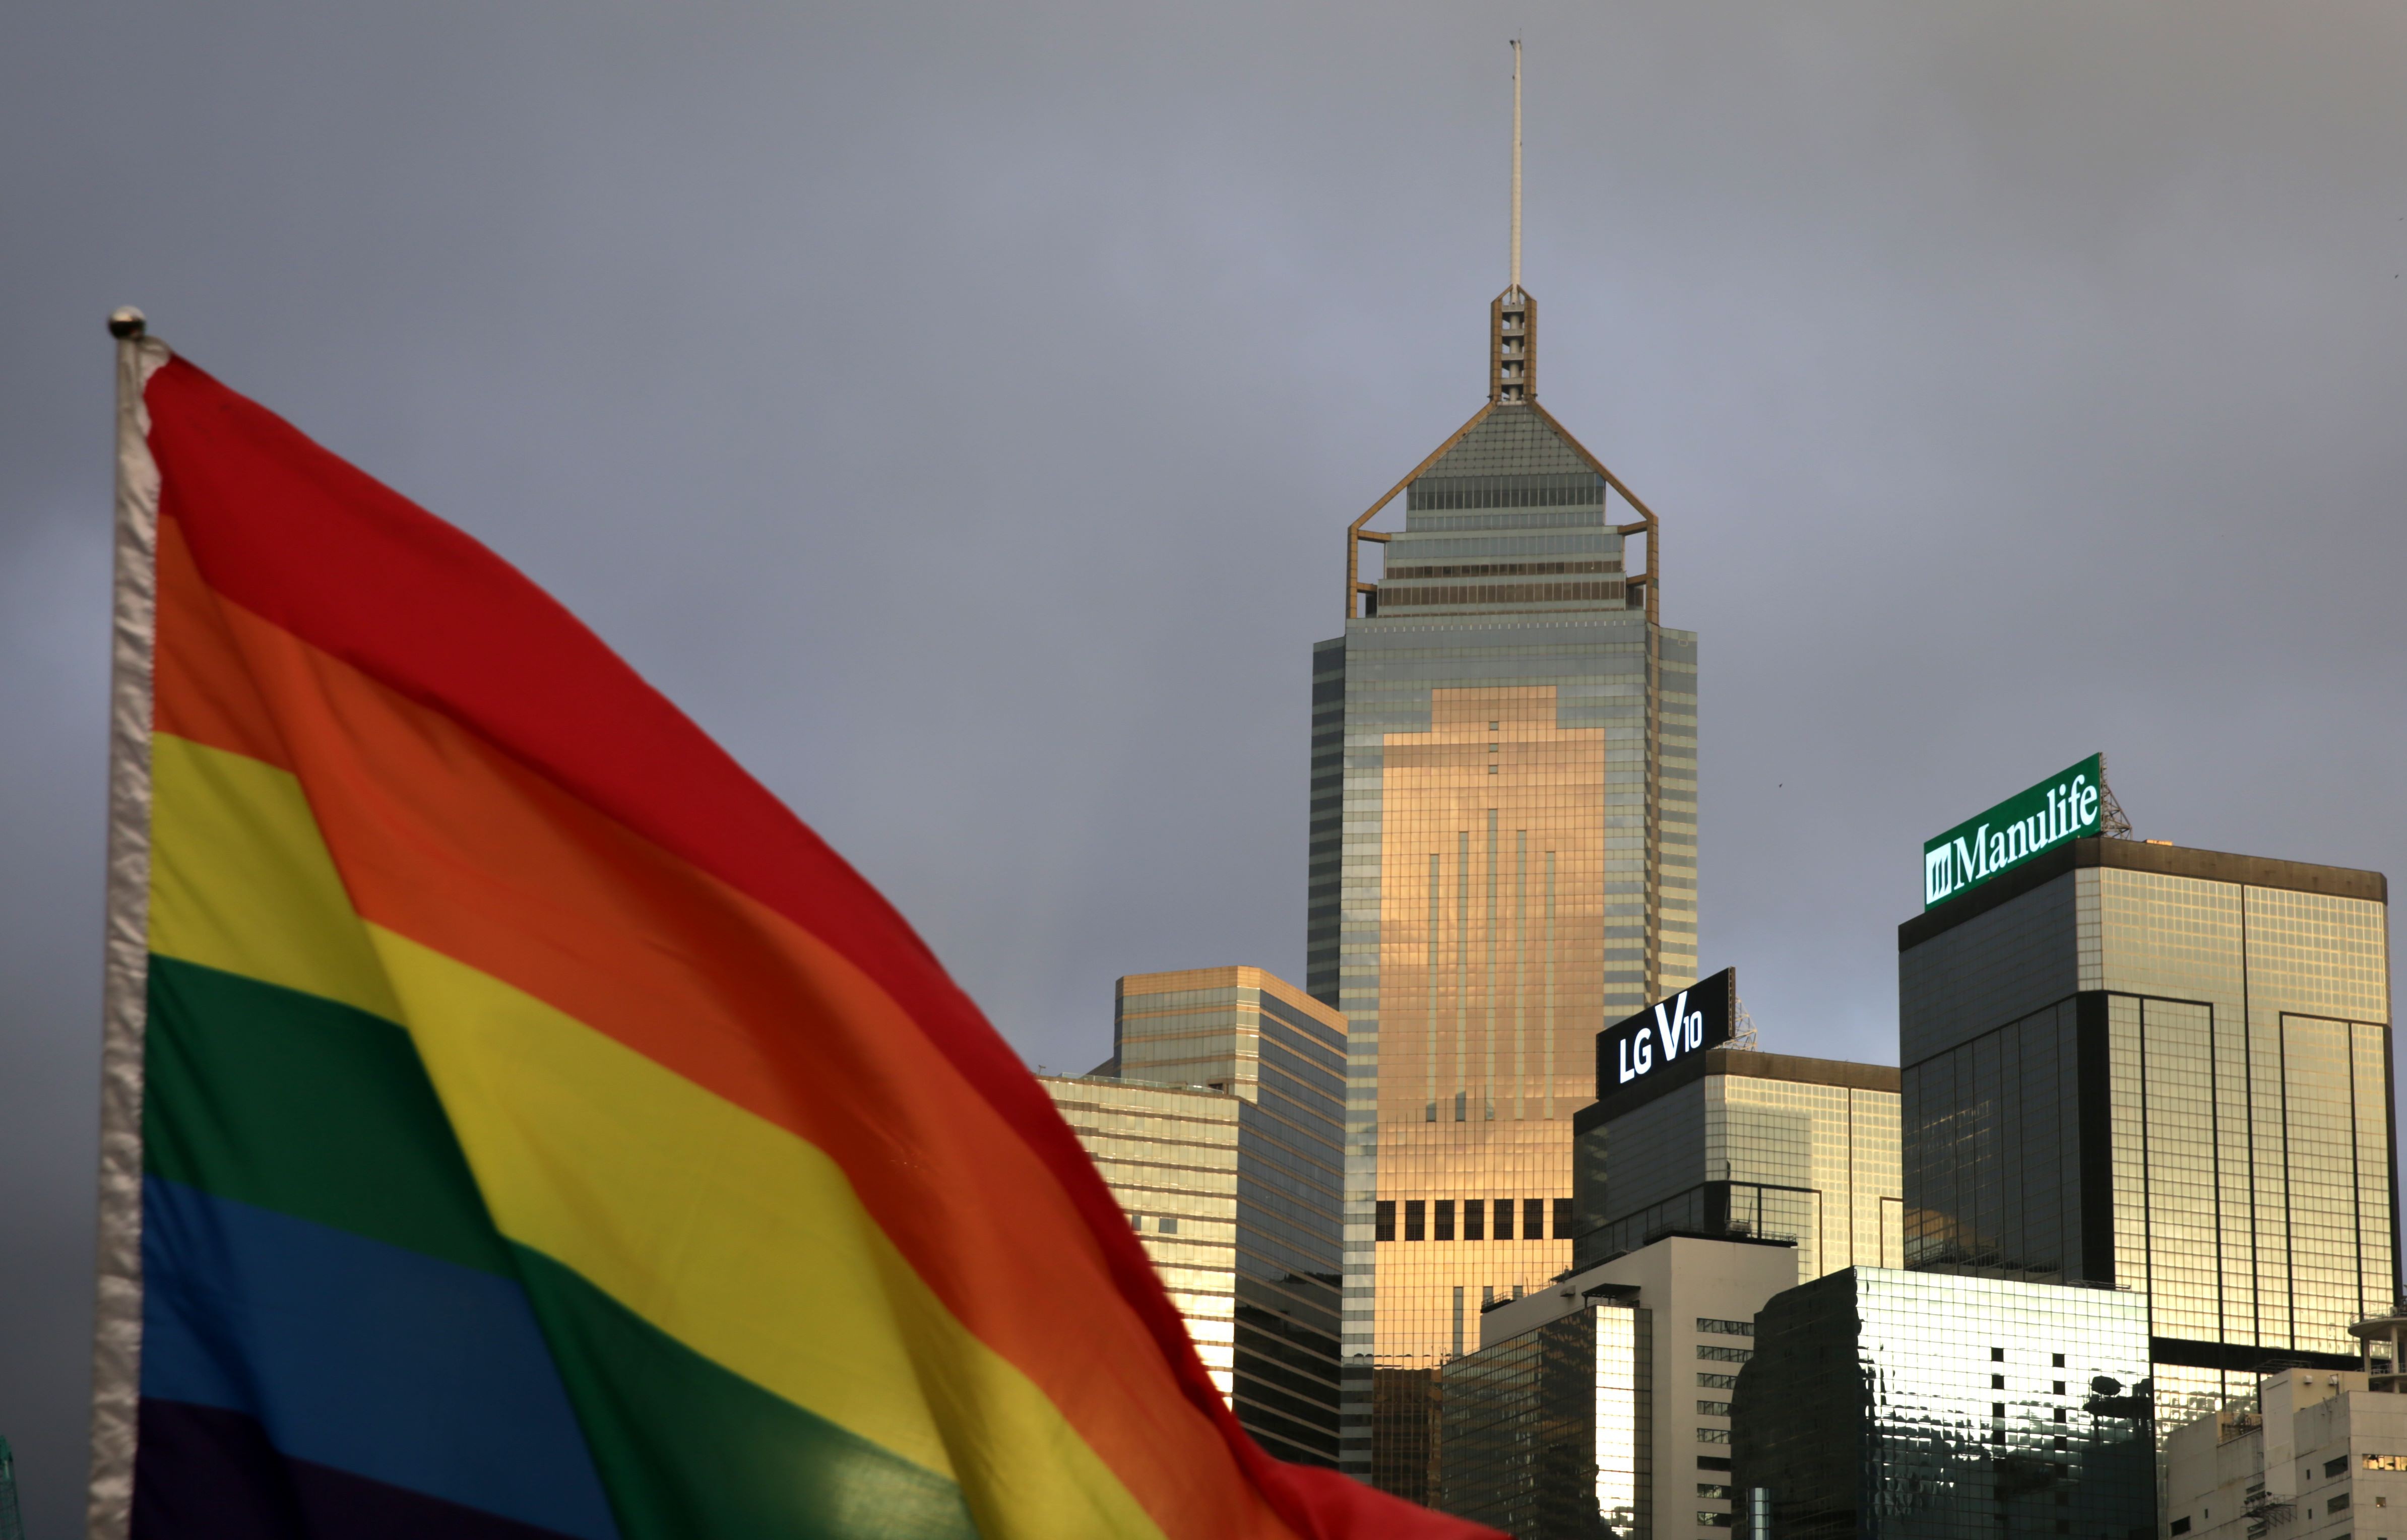 The manner in which the government of Hong Kong settles the issue of same-sex marriage will dovetail nicely with the city’s cosmopolitan claims. Photo: AFP